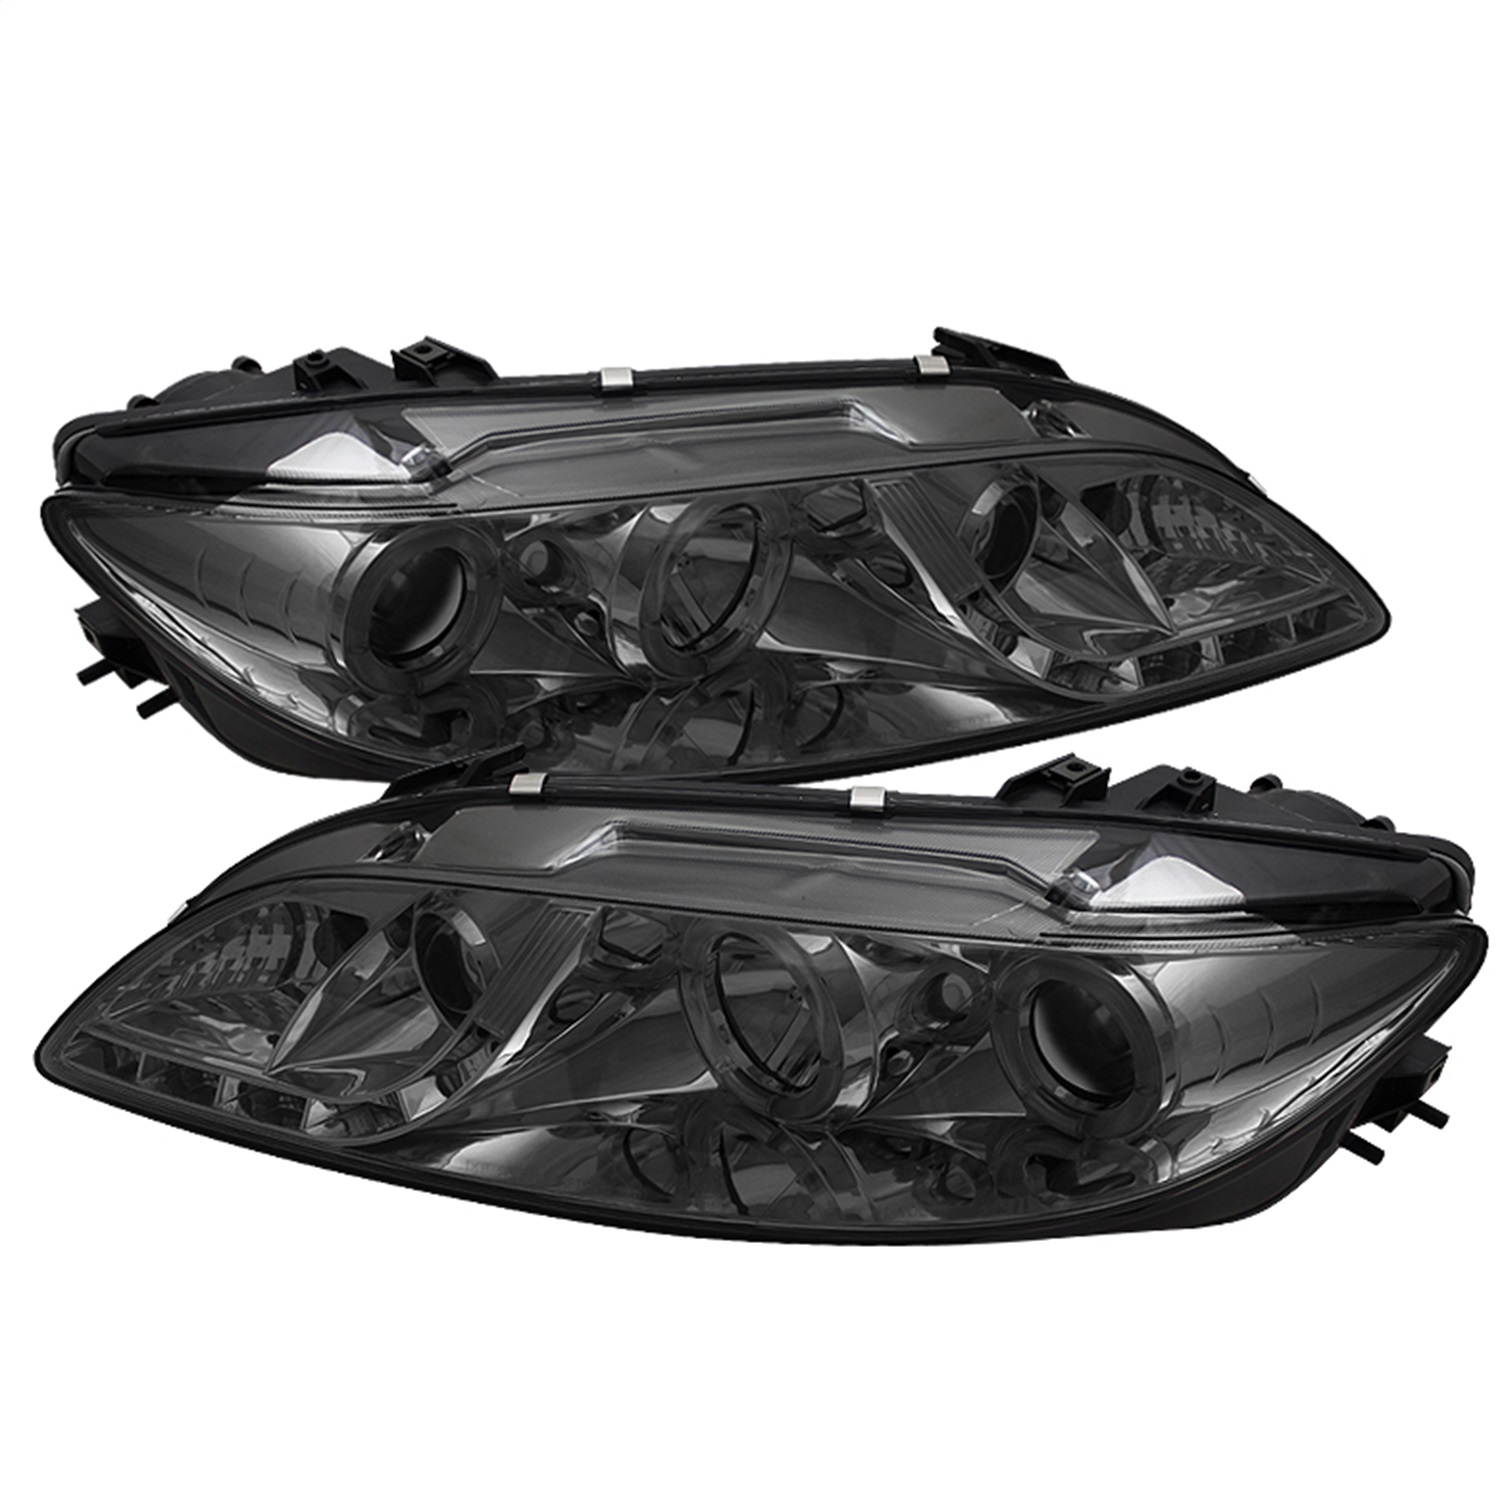 Spyder Auto 5042545 Halo DRL LED Projector Headlight Fits 03-05 6